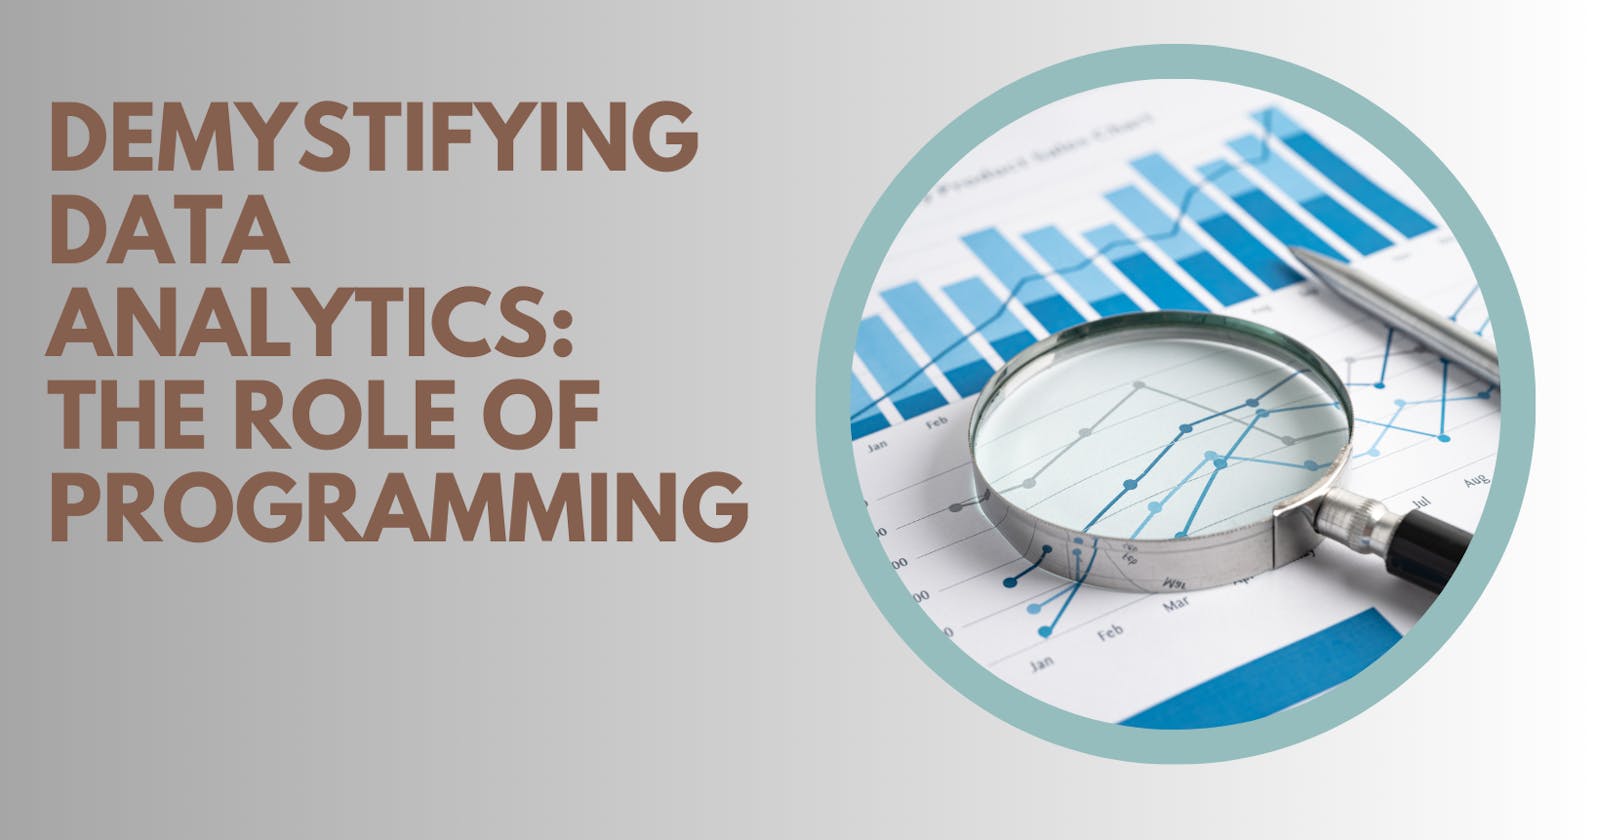 Demystifying Data Analytics: The Role of Programming